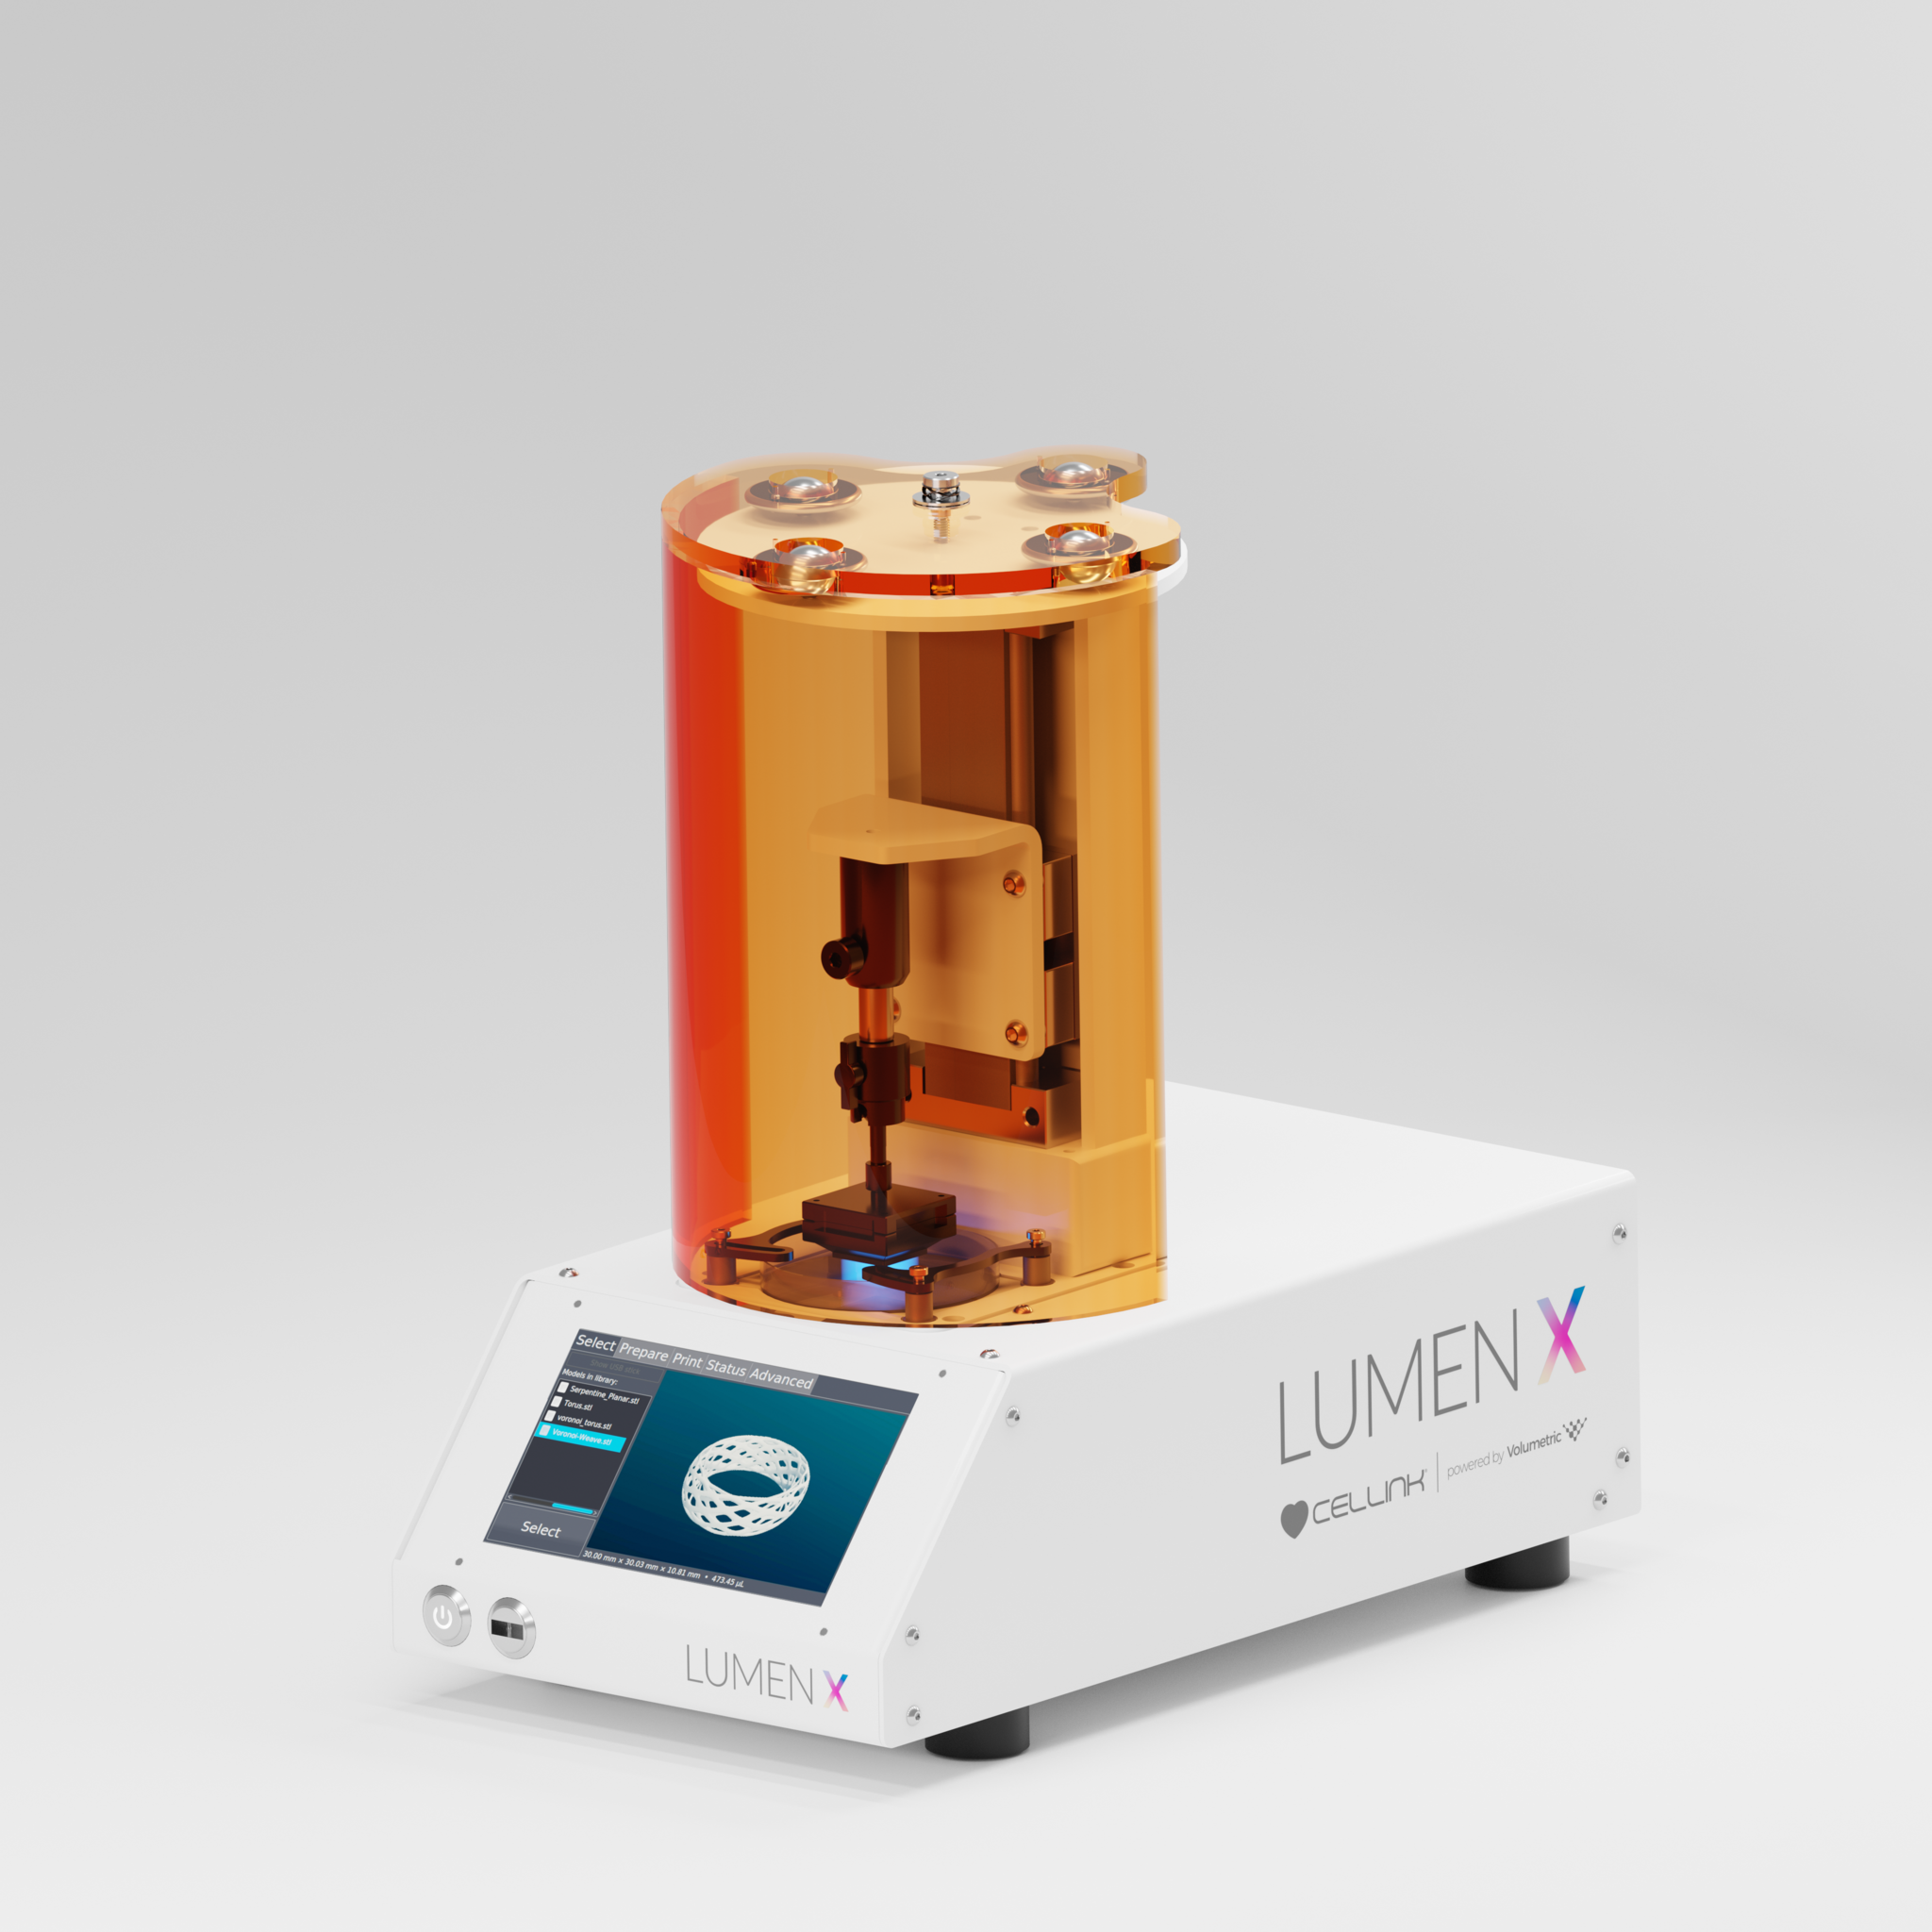 CELLINK and Volumetric Introduce Lumen X 3D Bioprinter for Larger Vascular Structures – Technical Specifications